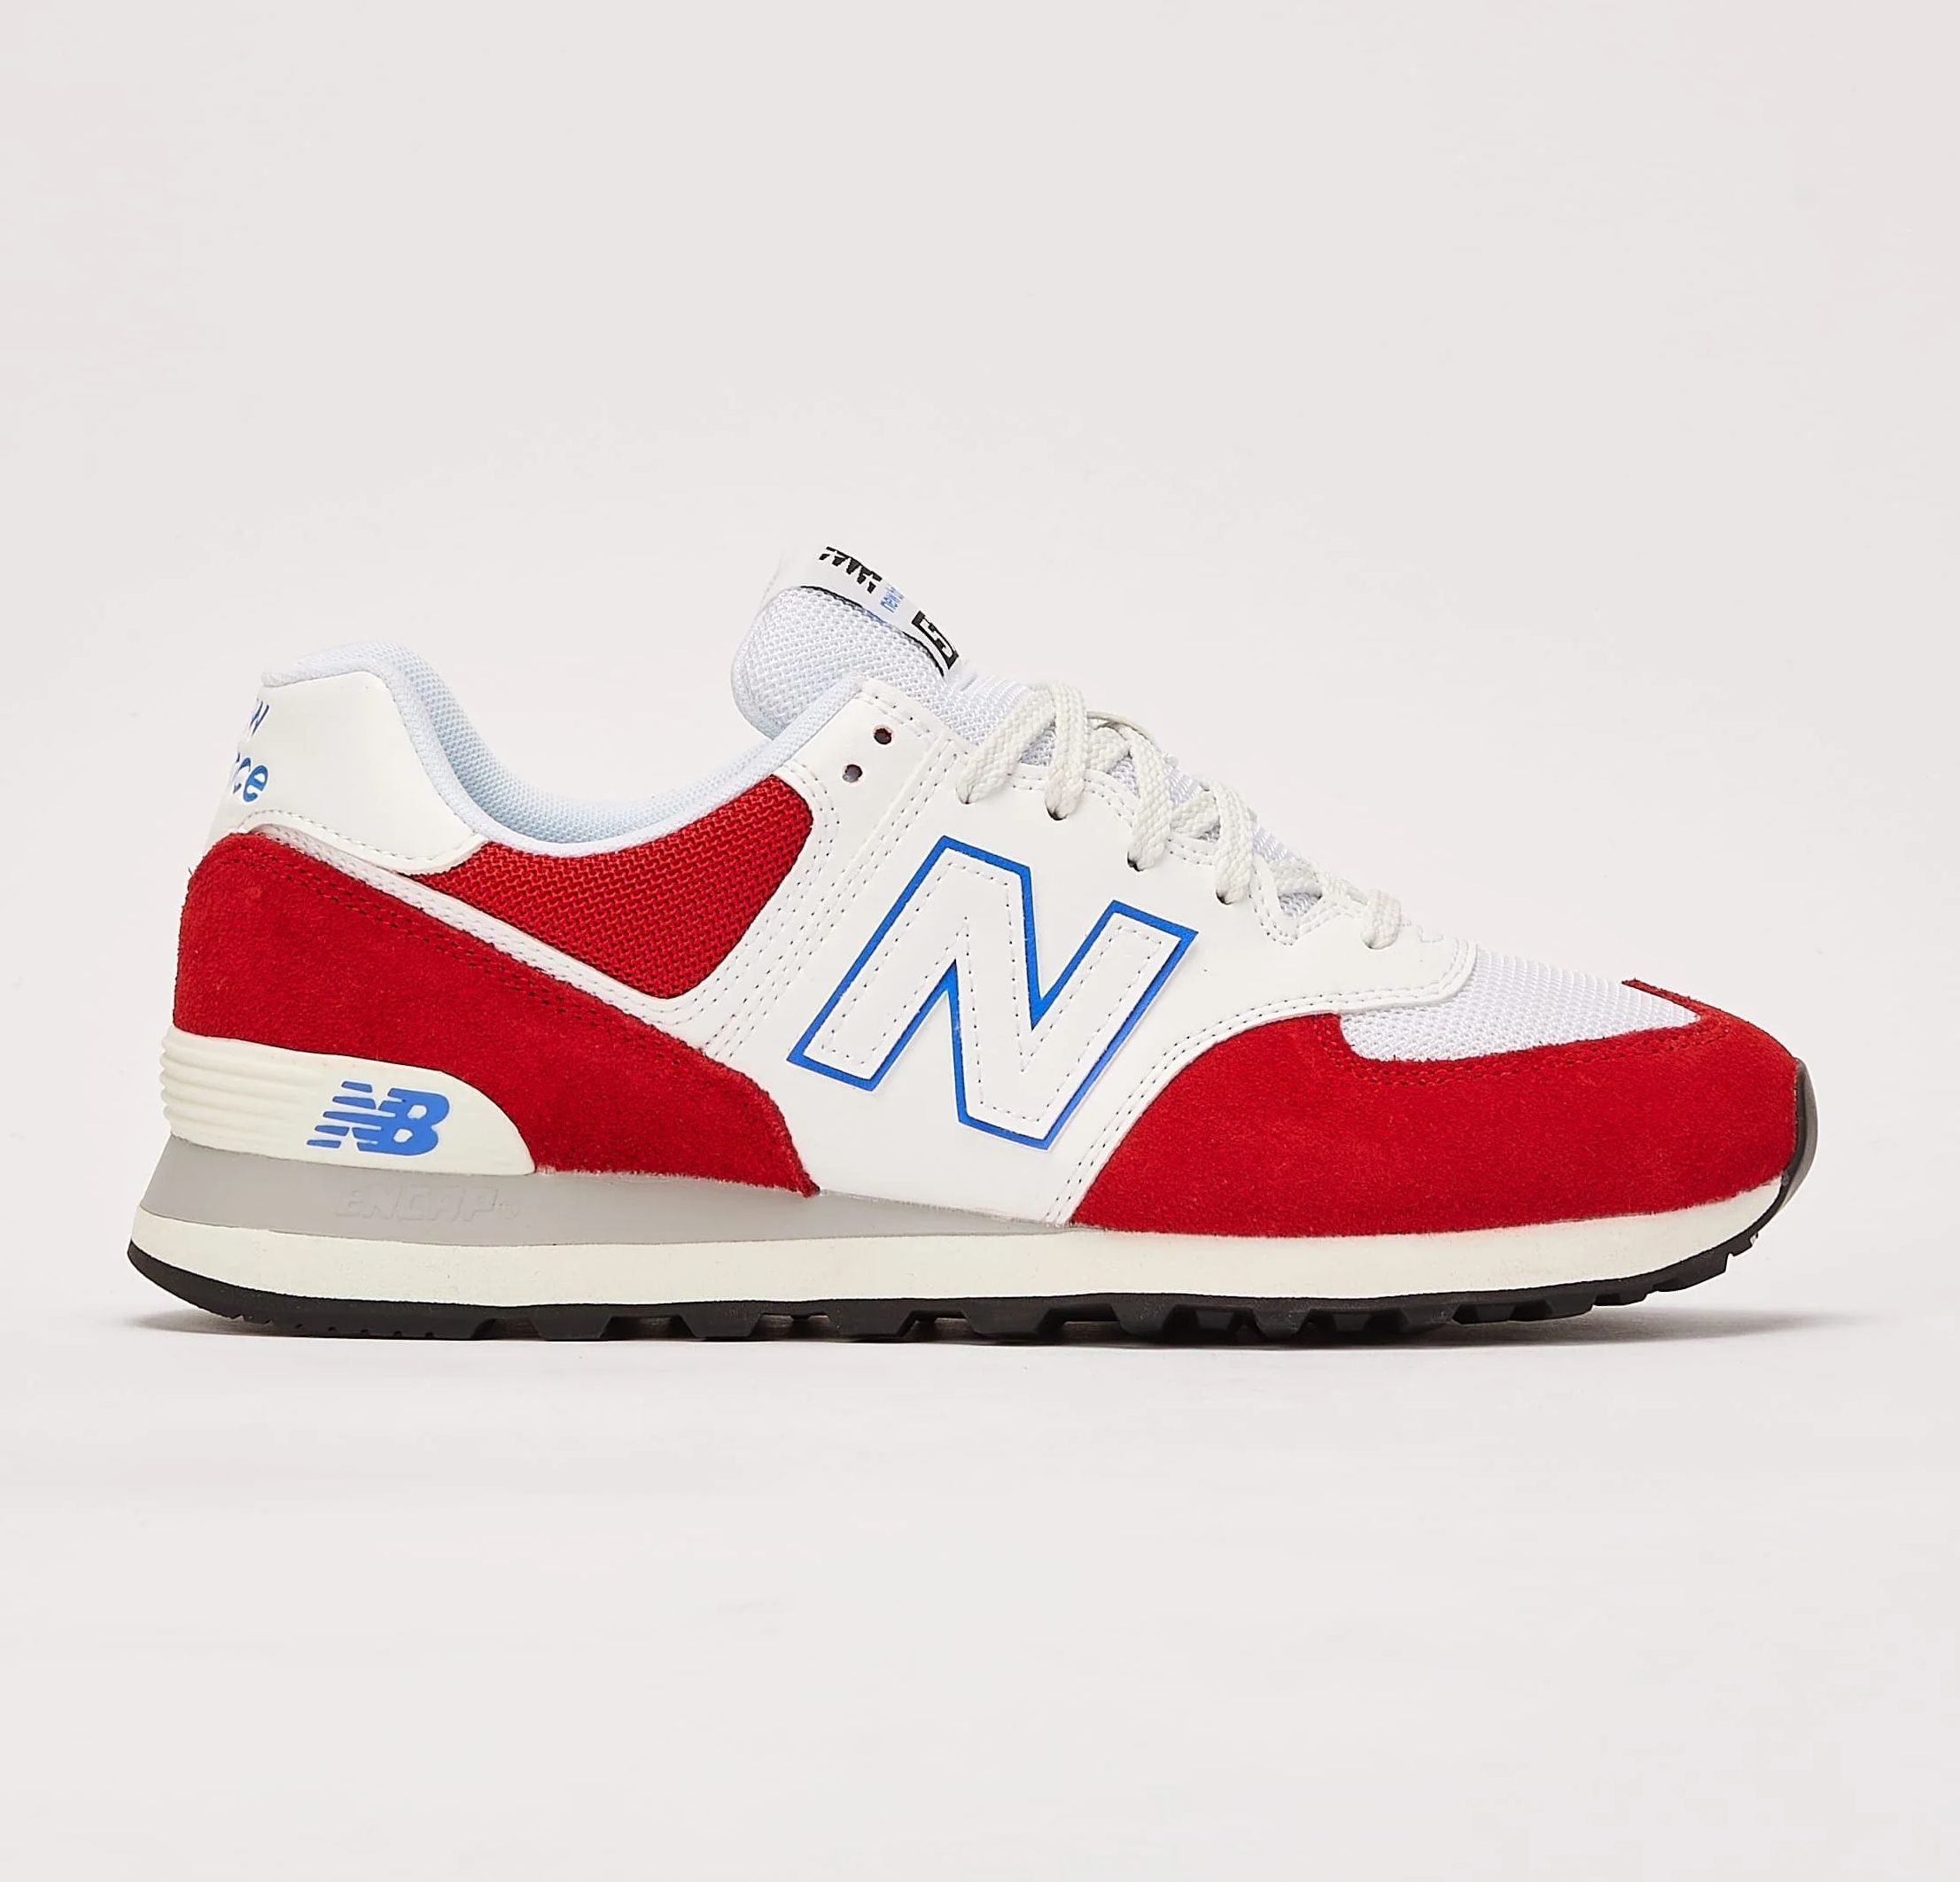 Sneaker Shouts™ on X: "60% OFF! New Balance 574 "Admiral Red" only $35.99  BUY HERE: https://t.co/zHRIck2C2i https://t.co/ZLs0sjVadA" / X